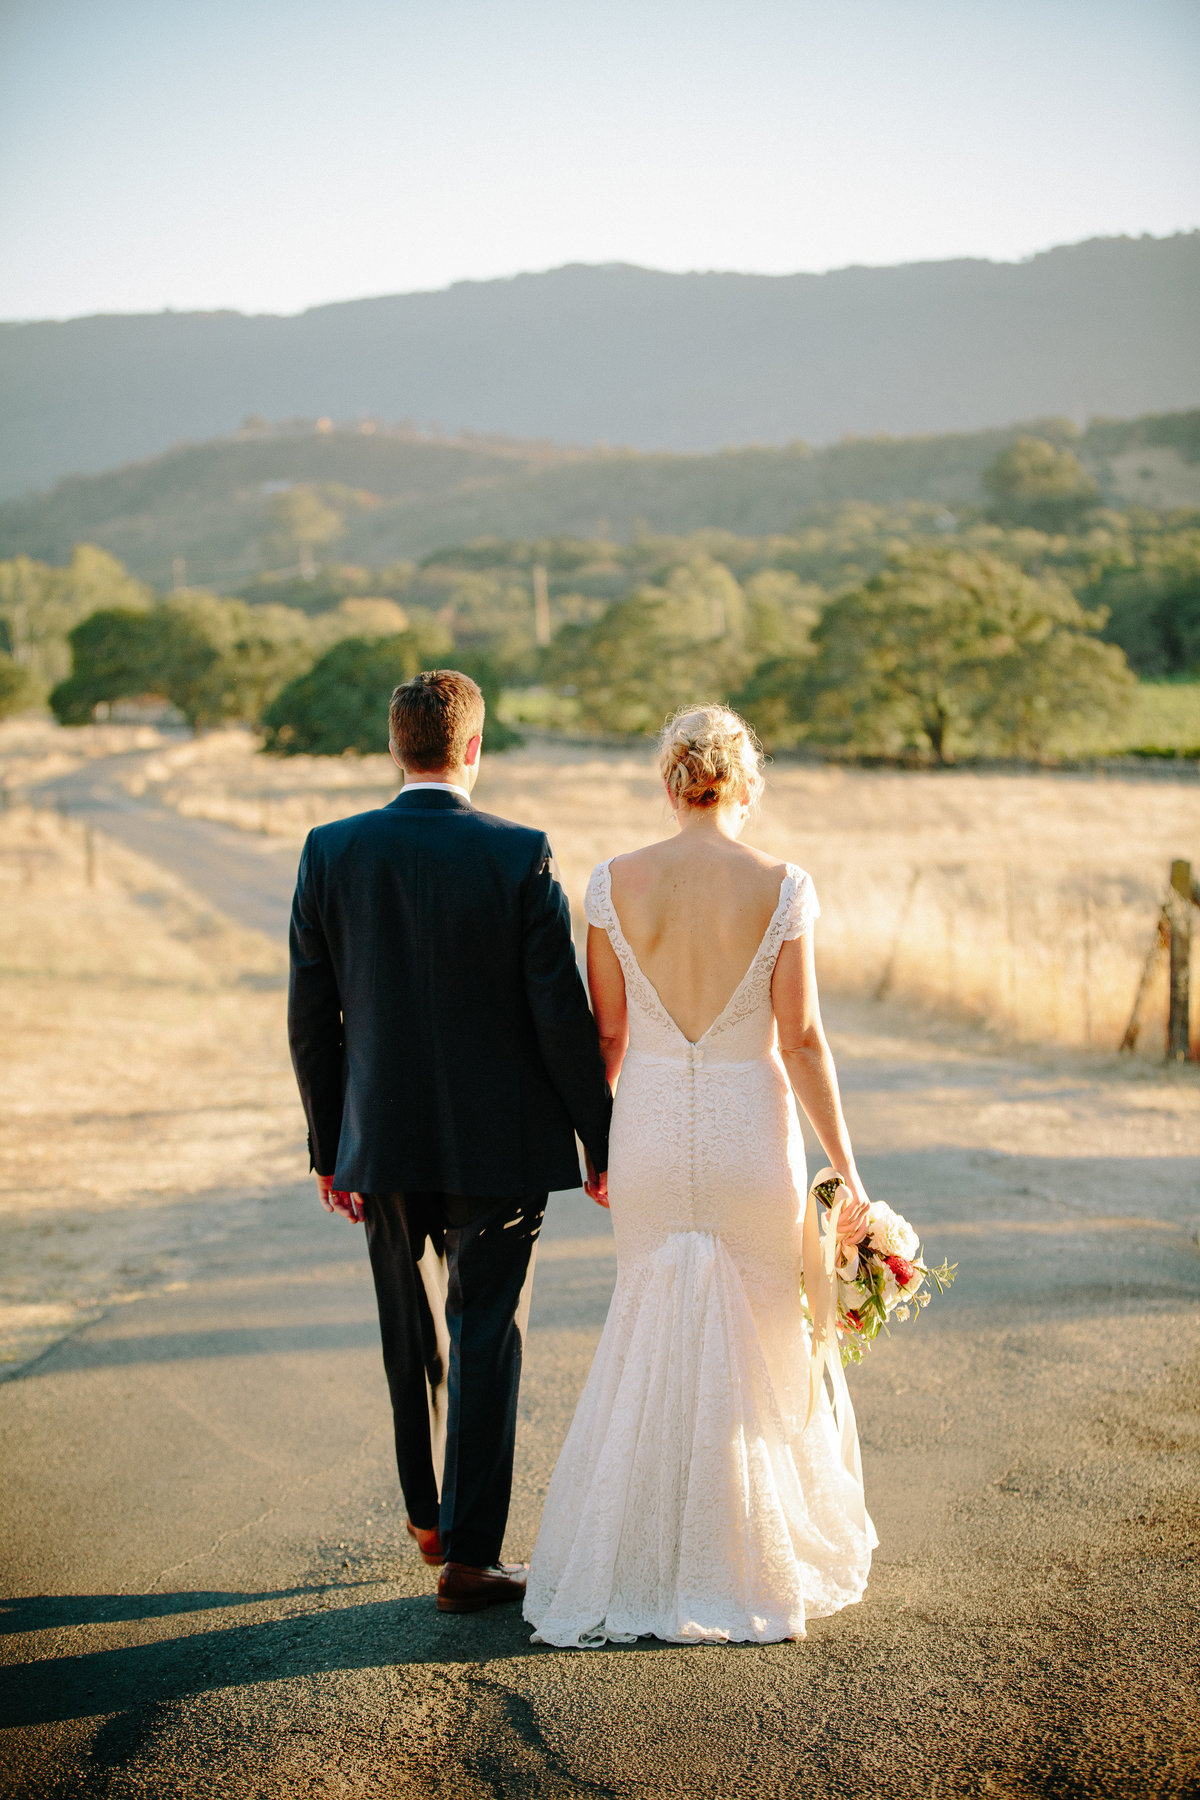 Outdoor wedding at Beltane Ranch in Sonoma.